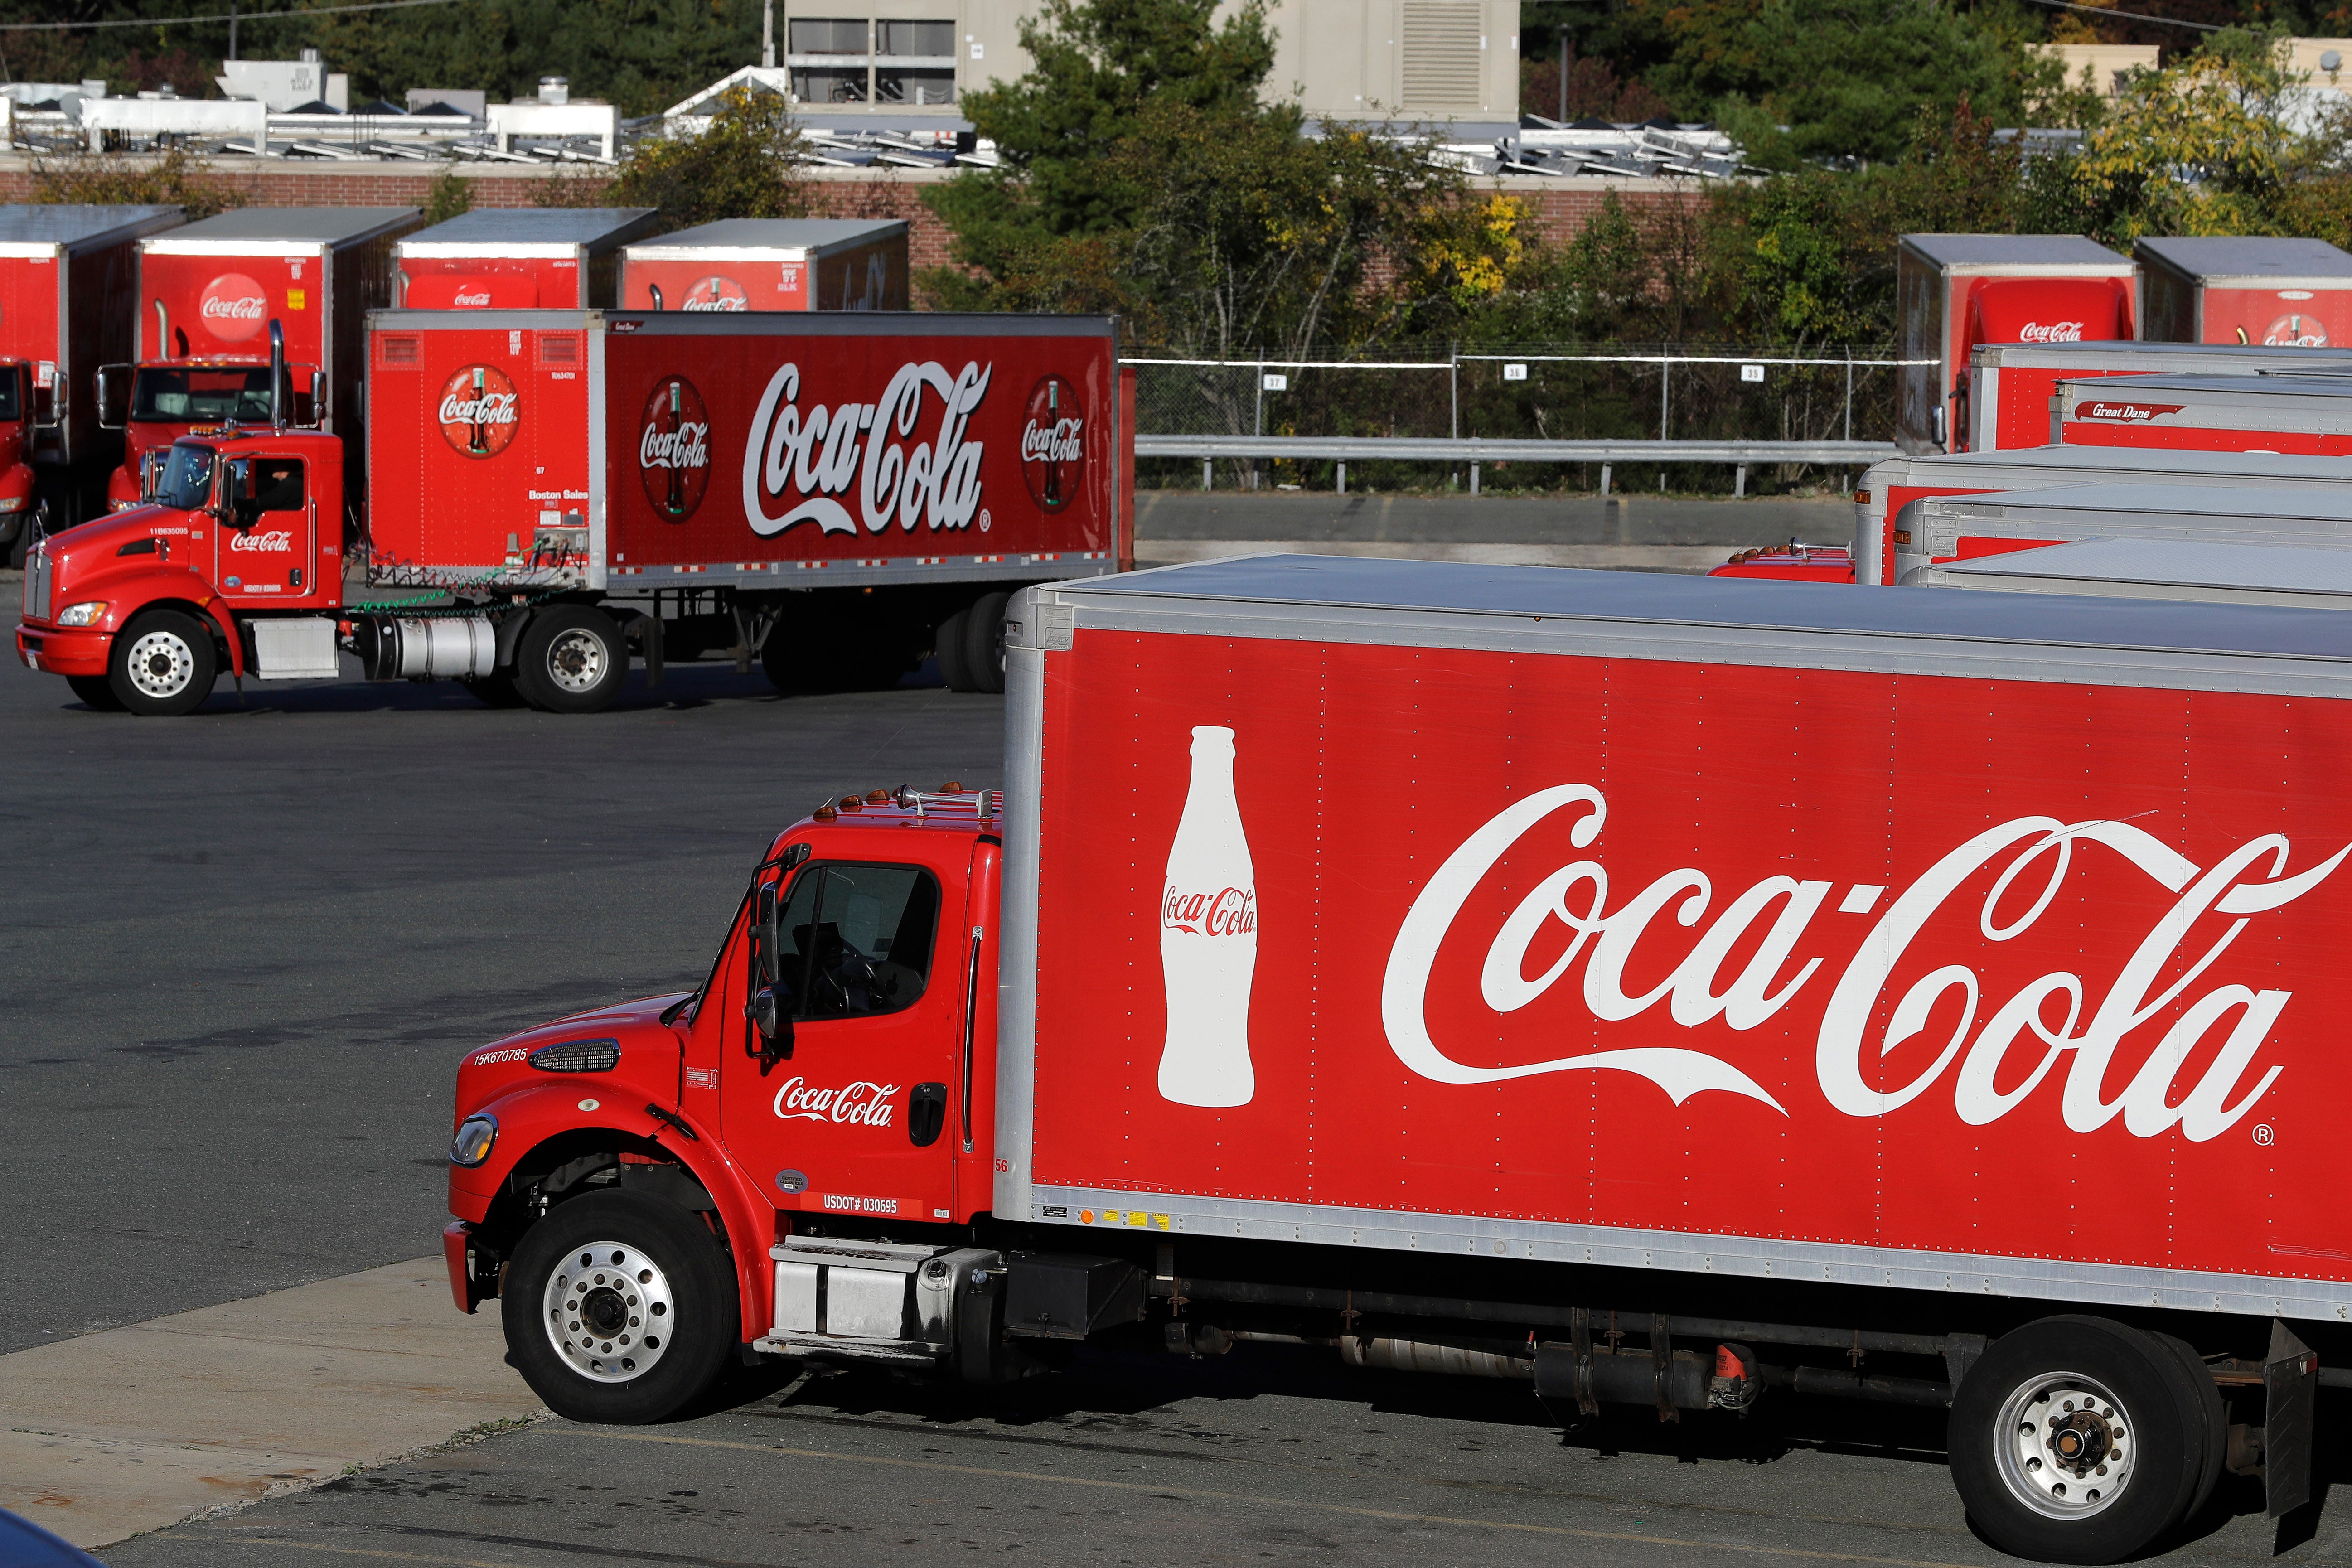 Coca Cola will reduce 2,200 jobs worldwide in restructuring